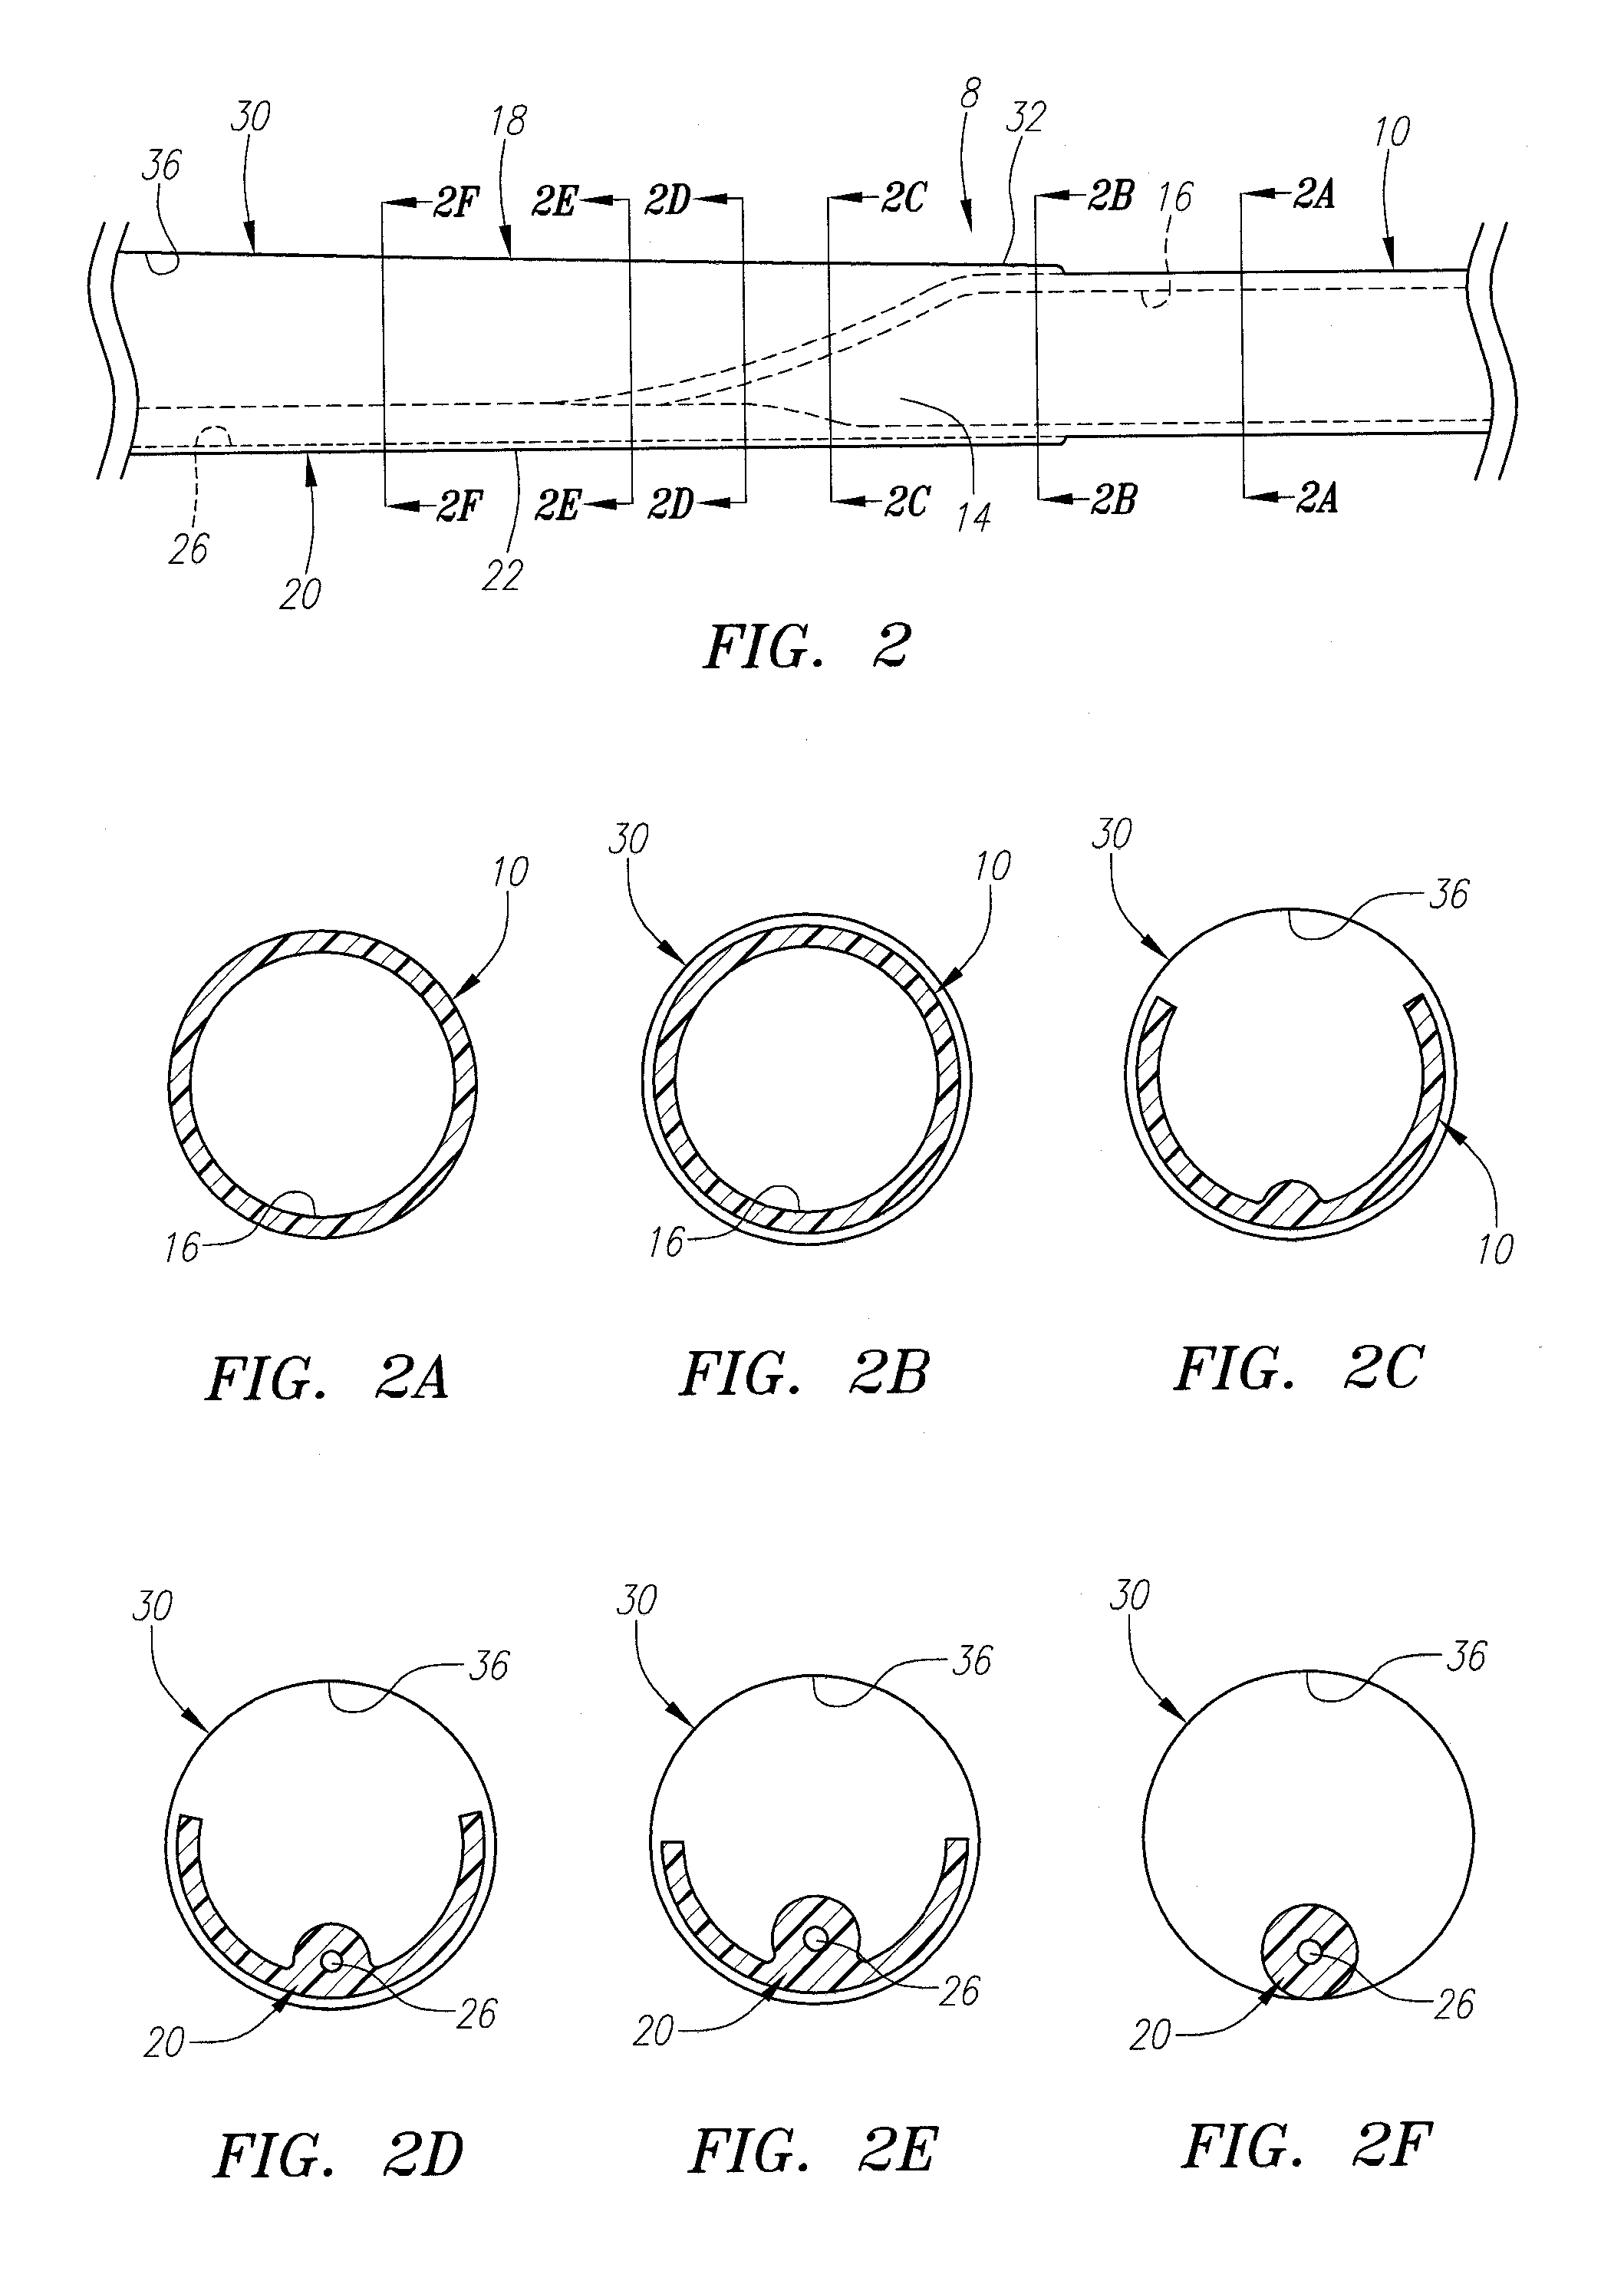 Shapeable for steerable guide sheaths and methods for making and using them